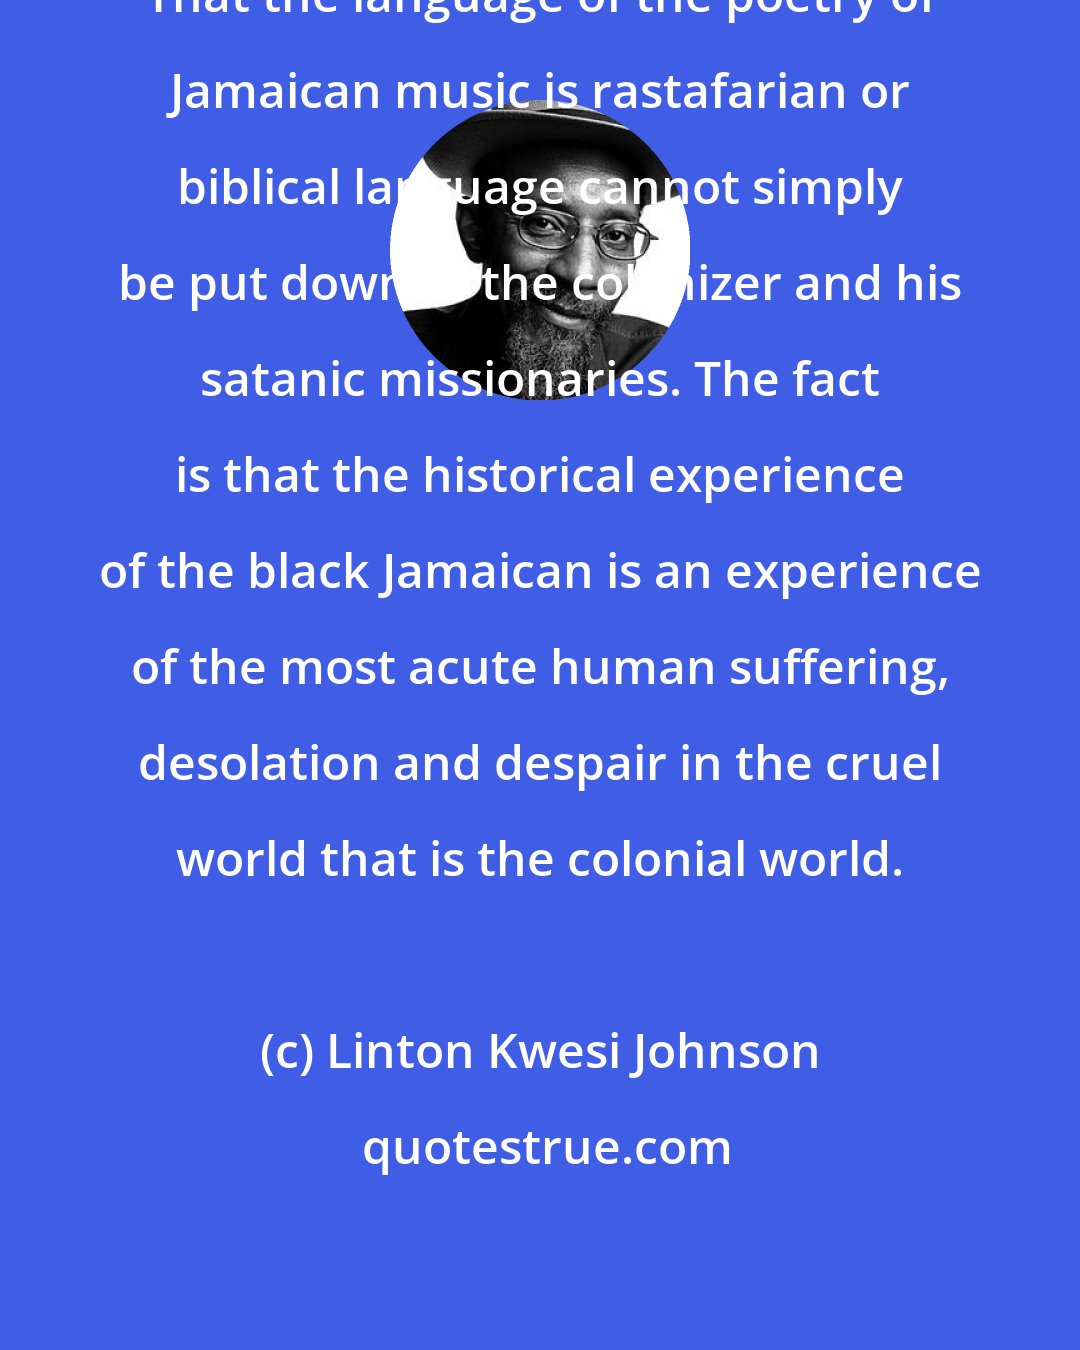 Linton Kwesi Johnson: That the language of the poetry of Jamaican music is rastafarian or biblical language cannot simply be put down to the colonizer and his satanic missionaries. The fact is that the historical experience of the black Jamaican is an experience of the most acute human suffering, desolation and despair in the cruel world that is the colonial world.